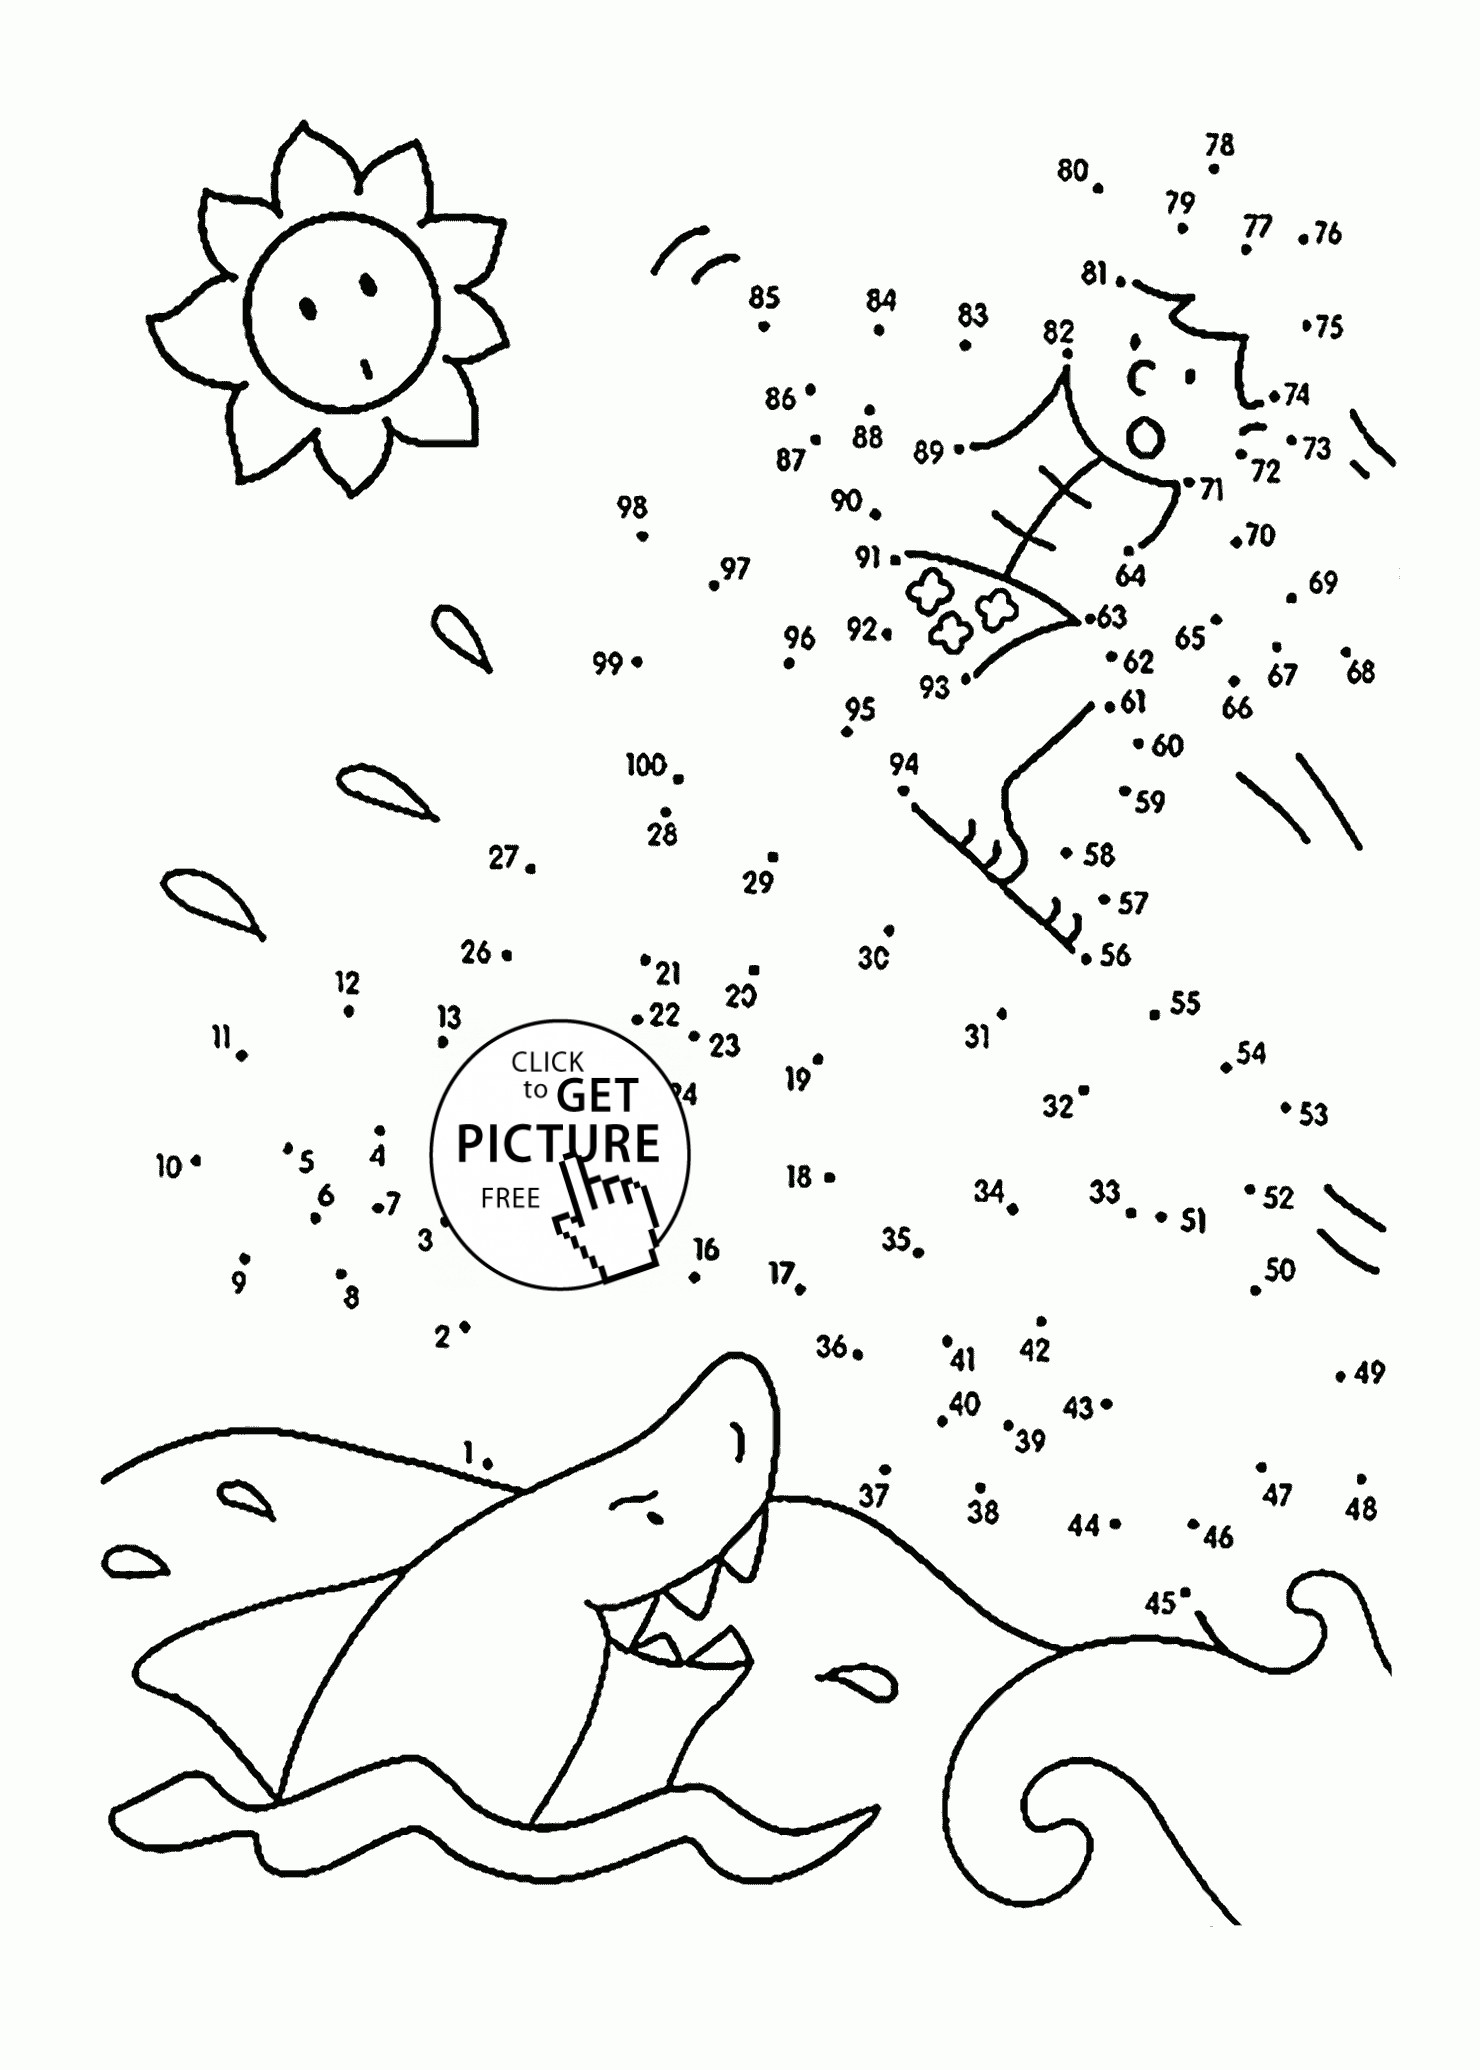 Boys Dot To Dot Coloring Pages
 Surfer and Shark Dot to Dot coloring pages for kids